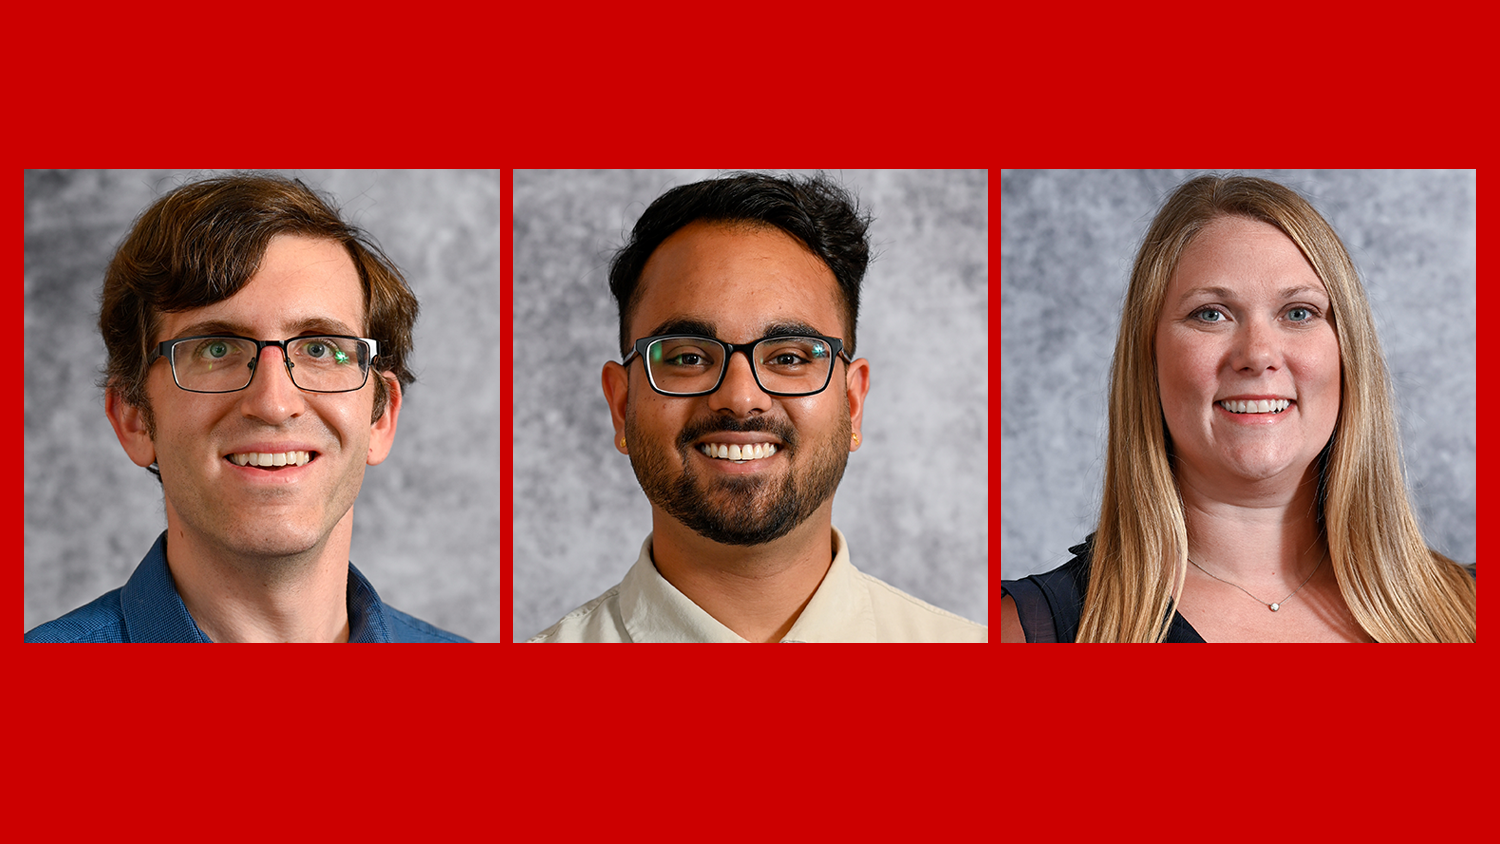 Our newest teaching faculty headshots. From left to right: Daniel Fowler, Naish Lallo, and Cassie Lilly